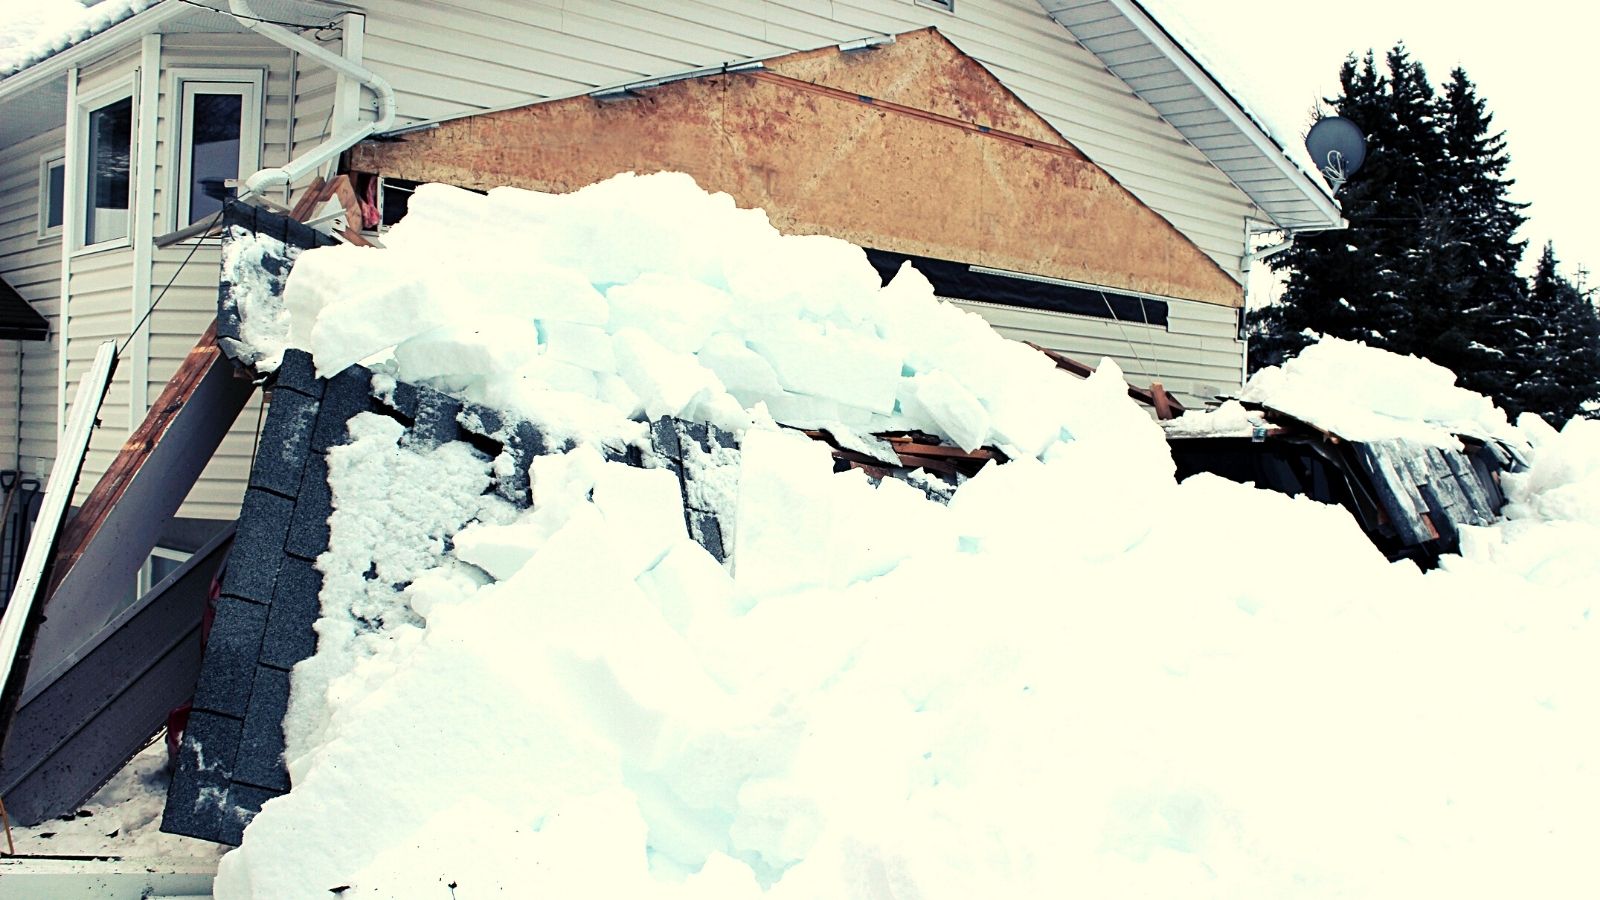 roof collapse from heavy snow